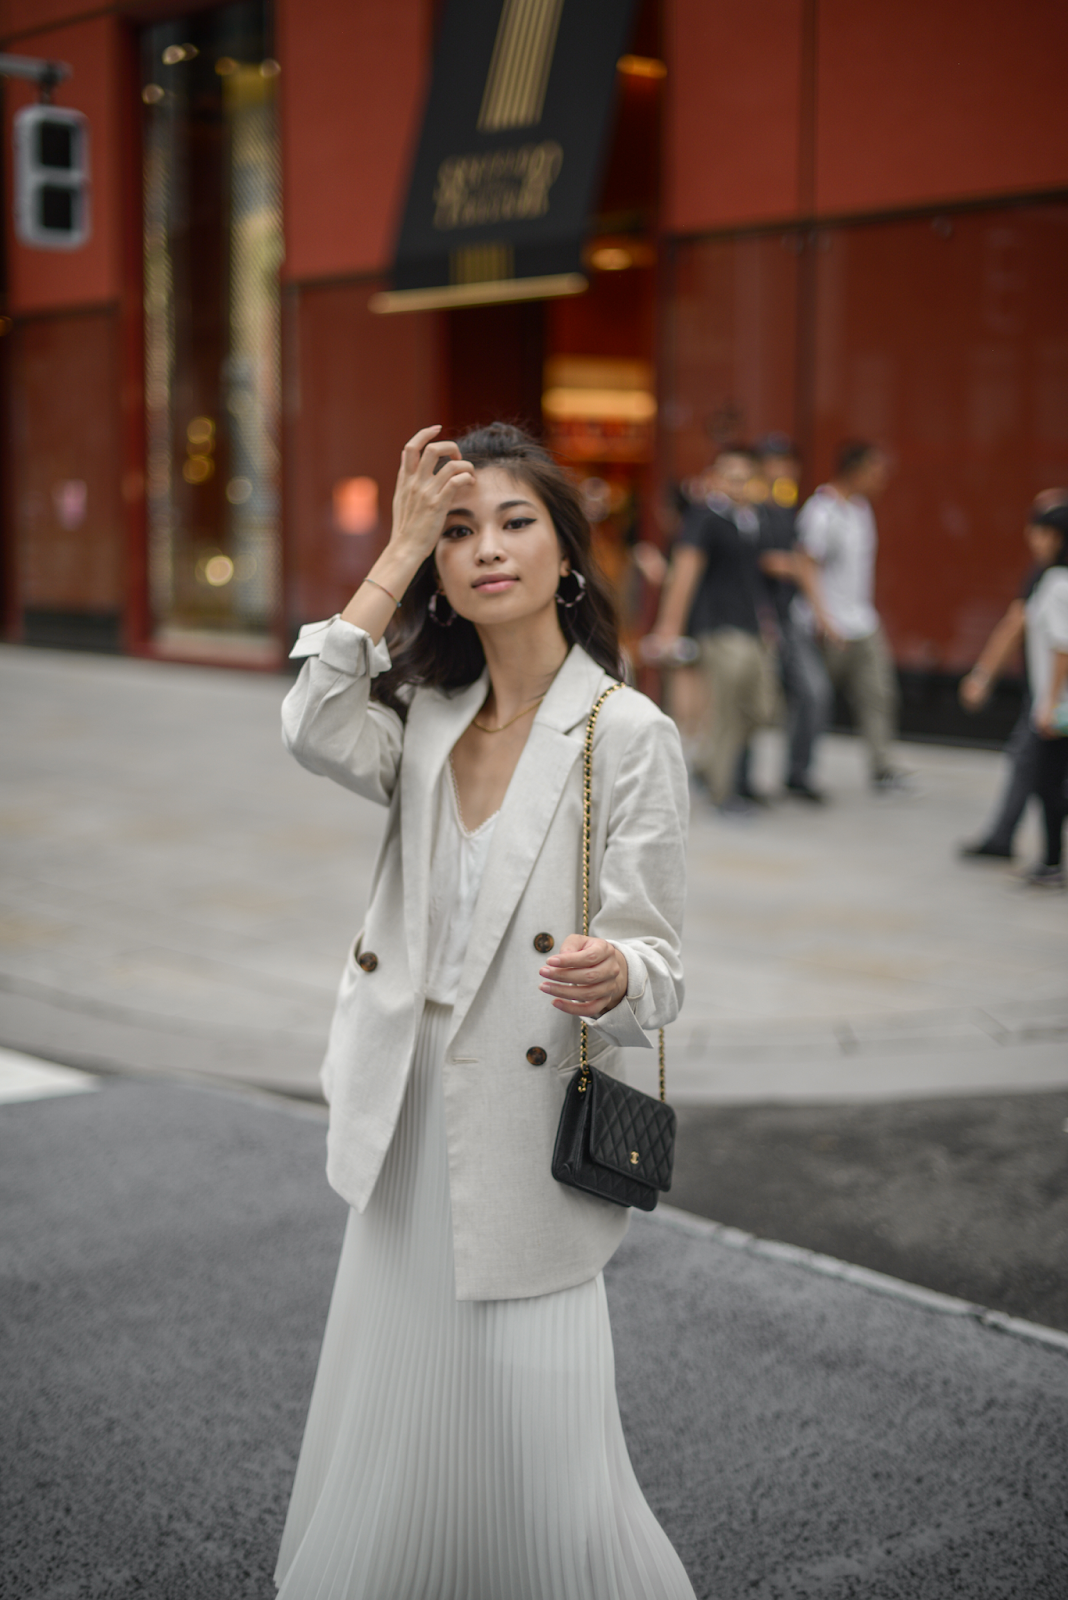 Shiseido, Clé De Peau Beauté, Tokyo, Ginza Style, #RadiantDay, #RadiantJourney, Japanese number one beauty brand, luxurious Japanese skincare / A Radiant Day in Tokyo with Clé De Peau Beauté / FOREVERVANNY